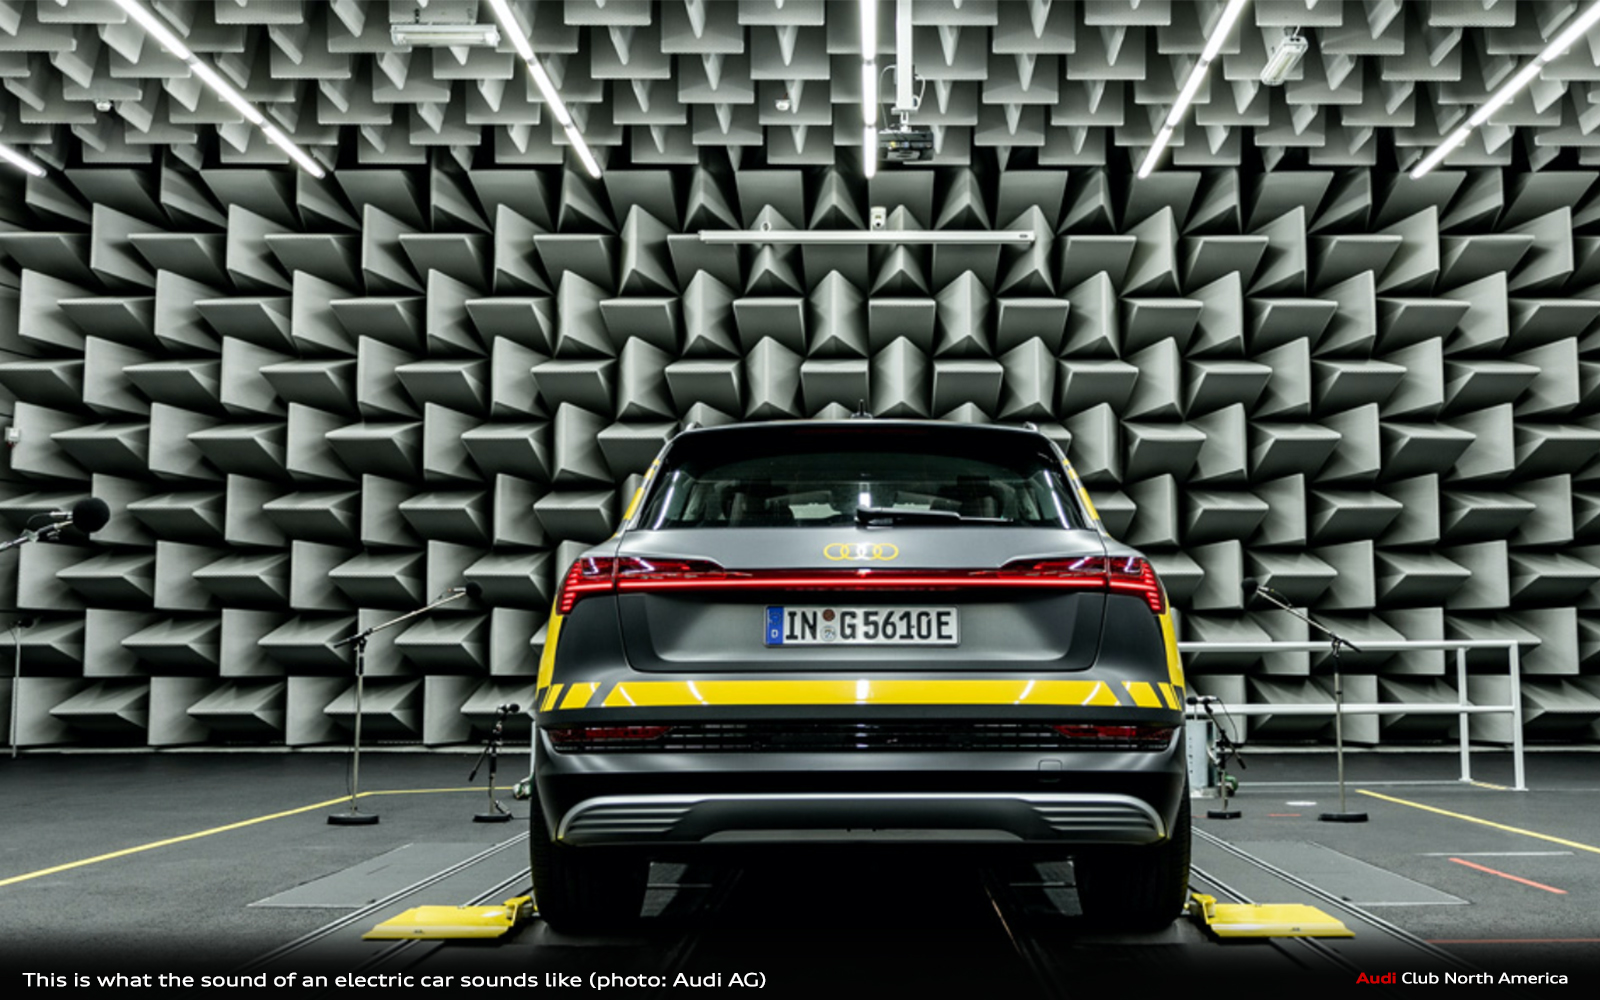 This Is What the Sound of an Electric Car Sounds Like Audi Club North